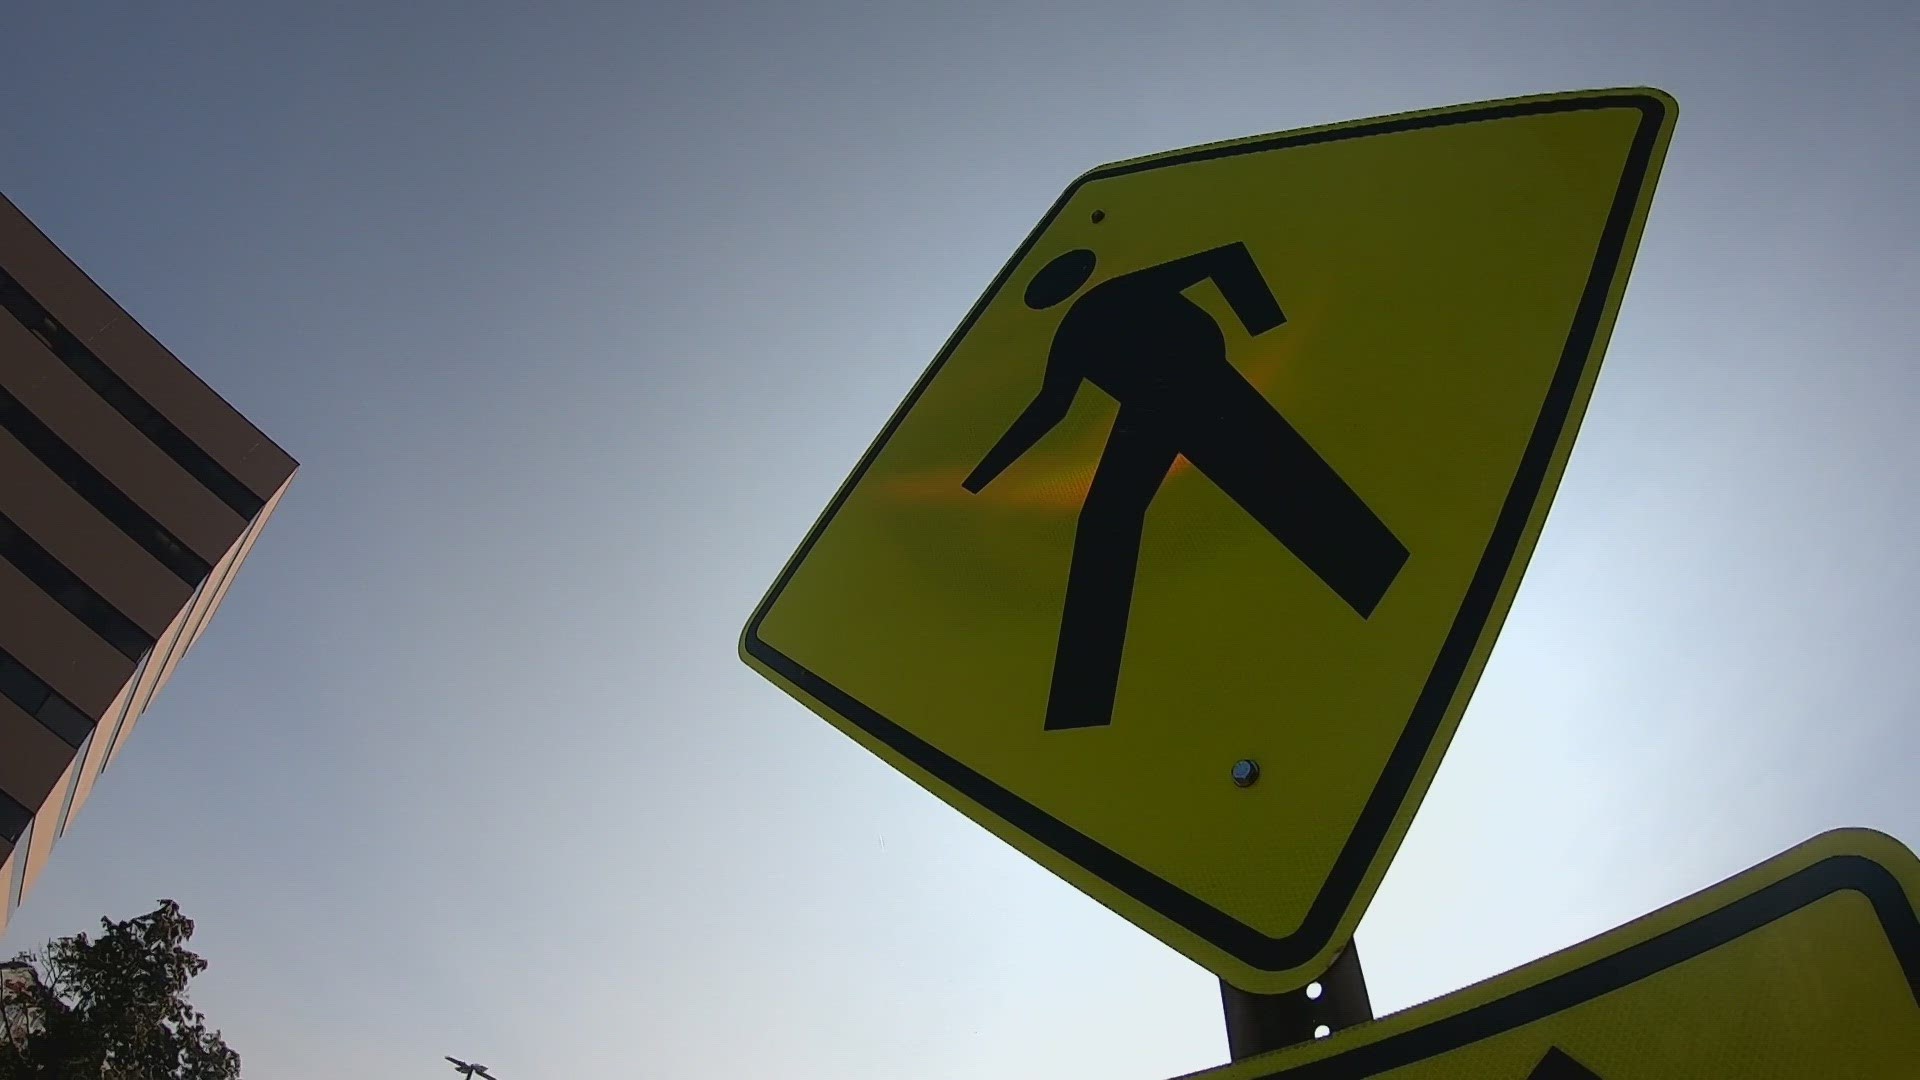 Funded by grants through the AARP Foundation, the city is hosting a handful of public walking audits for the public to view and address concerns for pedestrians.